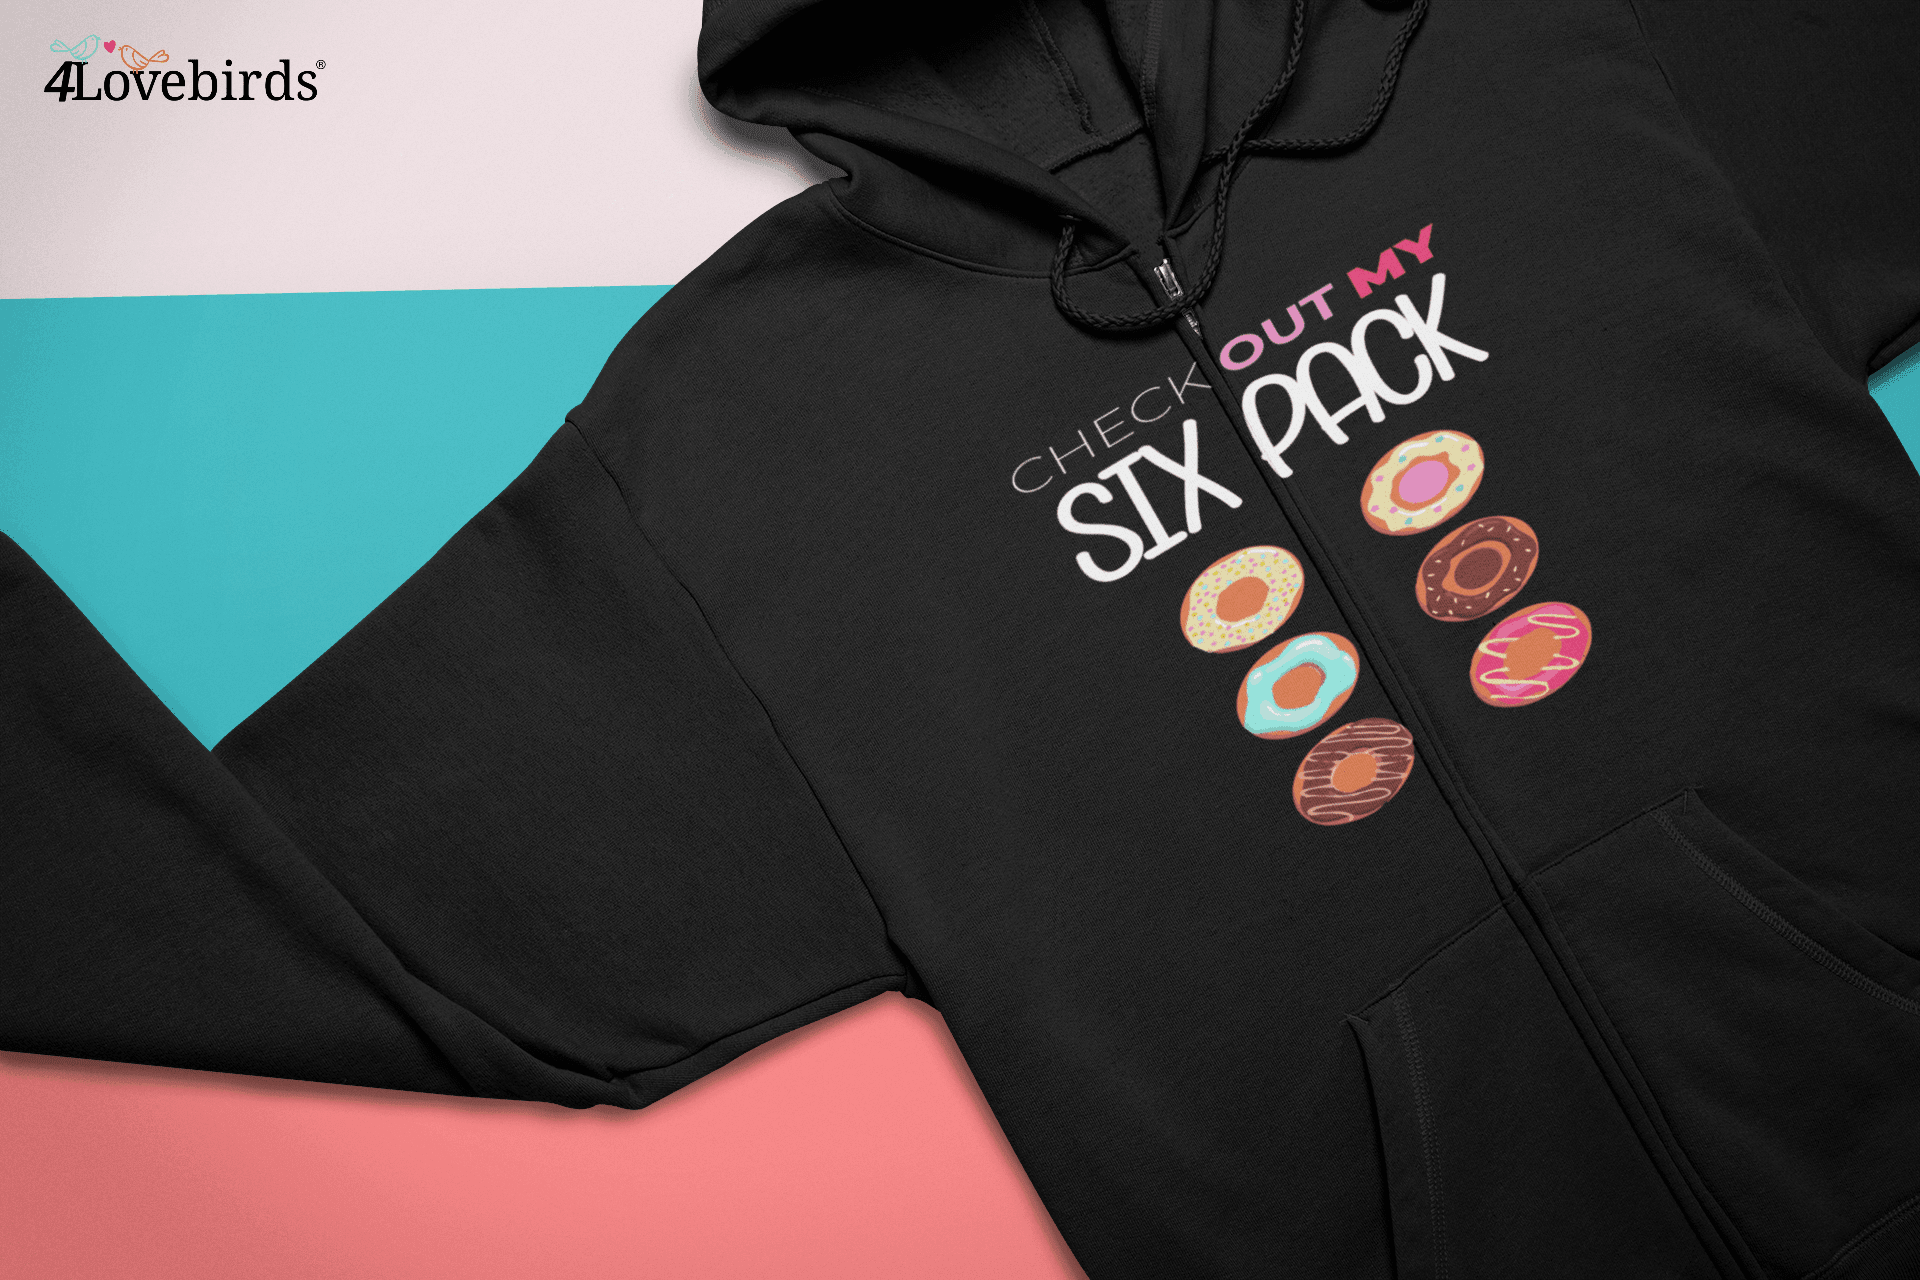 Check Out My Six Pack Hoodie, Donut Lover Shirt, Funny Gym Shirt, Six Pack Sweather, Funny Workout Gym Shirt, Donut Shirt, Funny Donut Shirt - 4Lovebirds